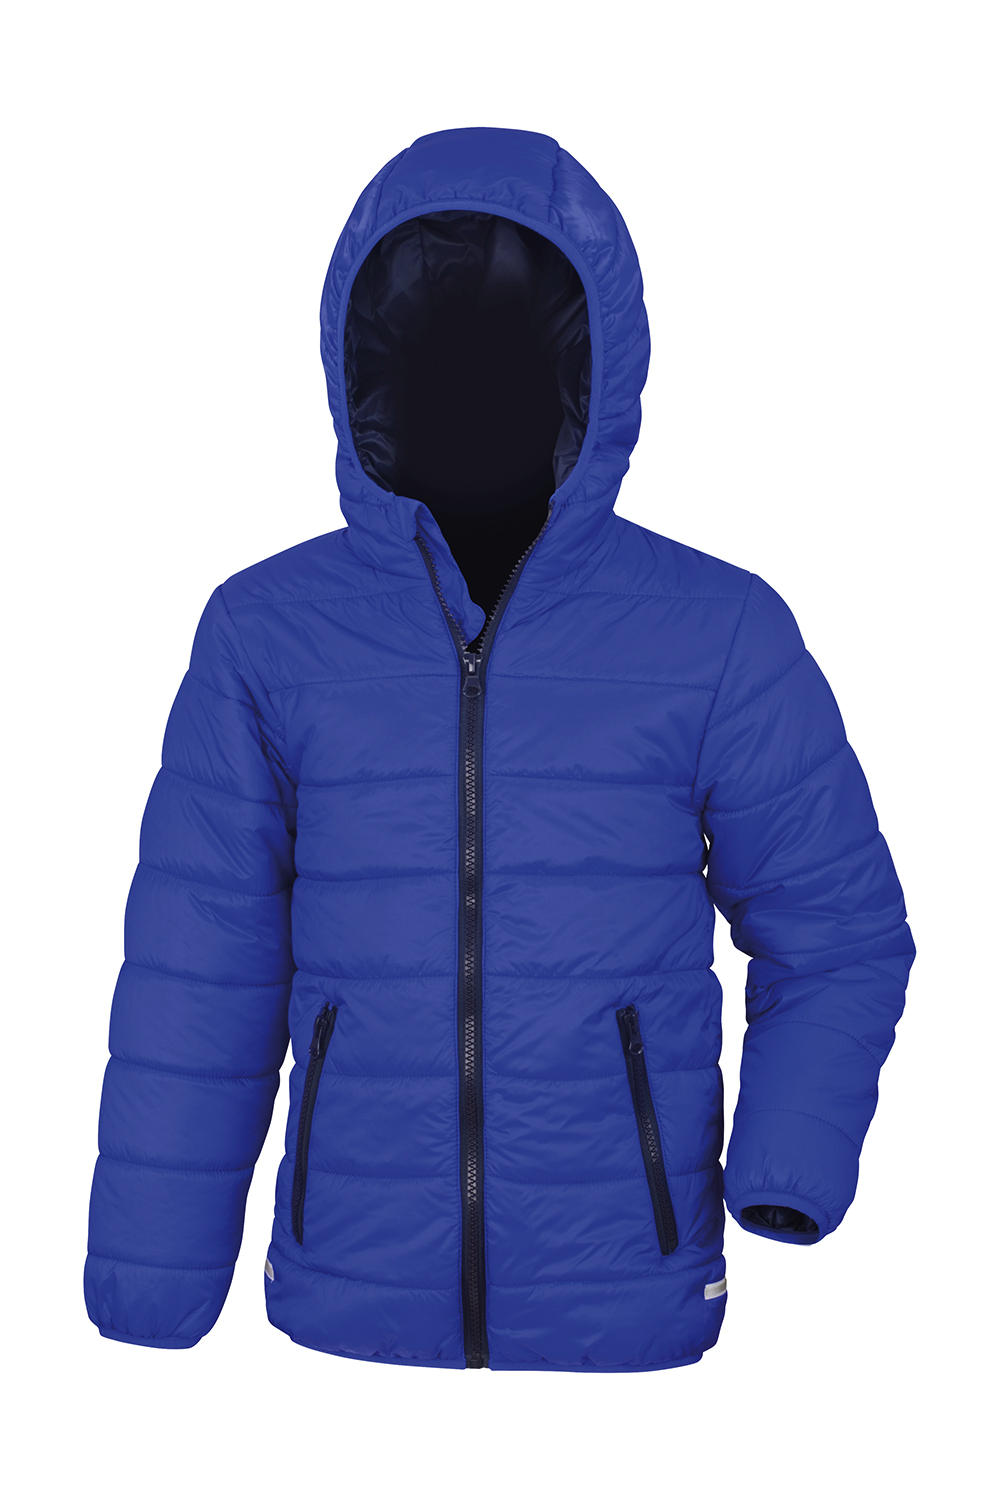  Junior/Youth Soft Padded Jacket in Farbe Royal/Navy